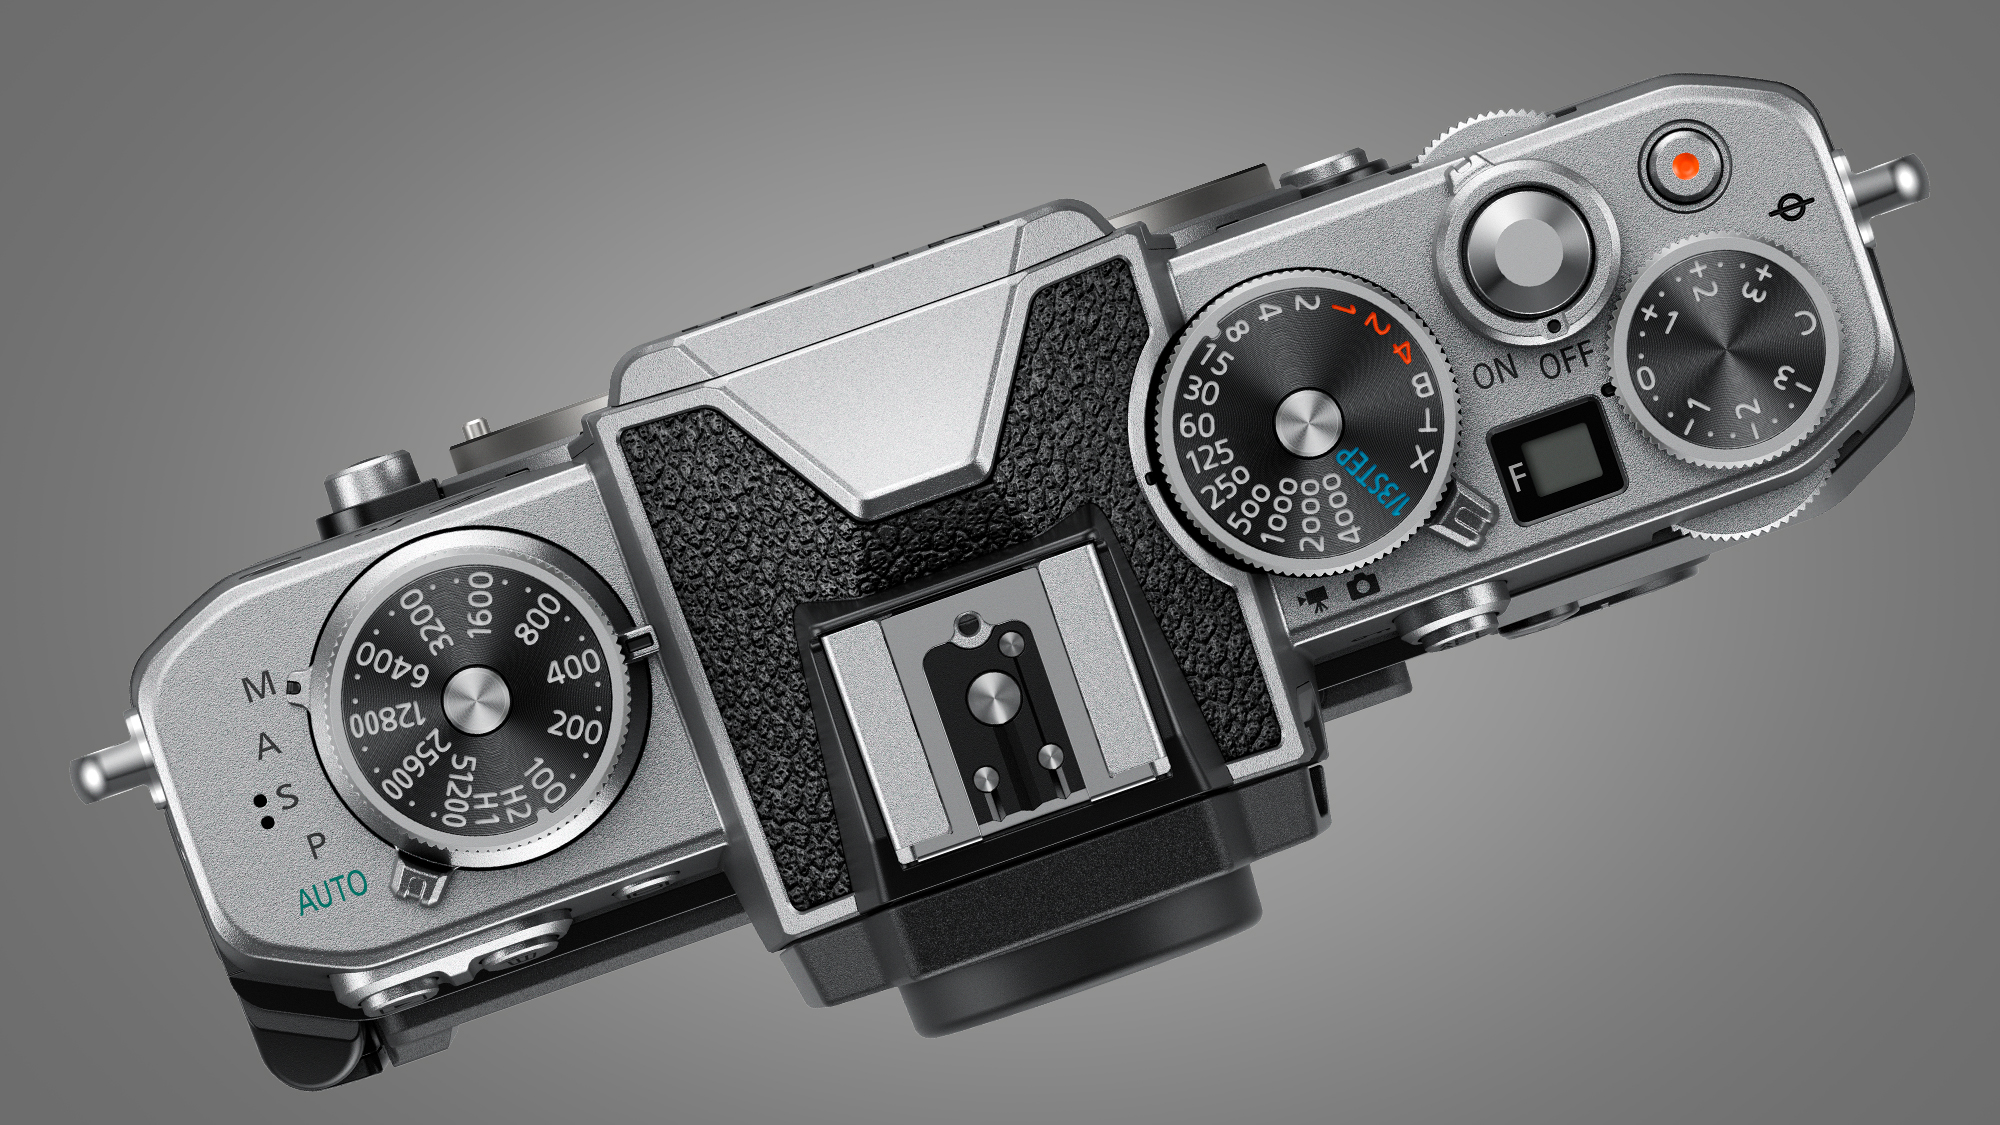 The Nikon Zfc's top plate controls and dials